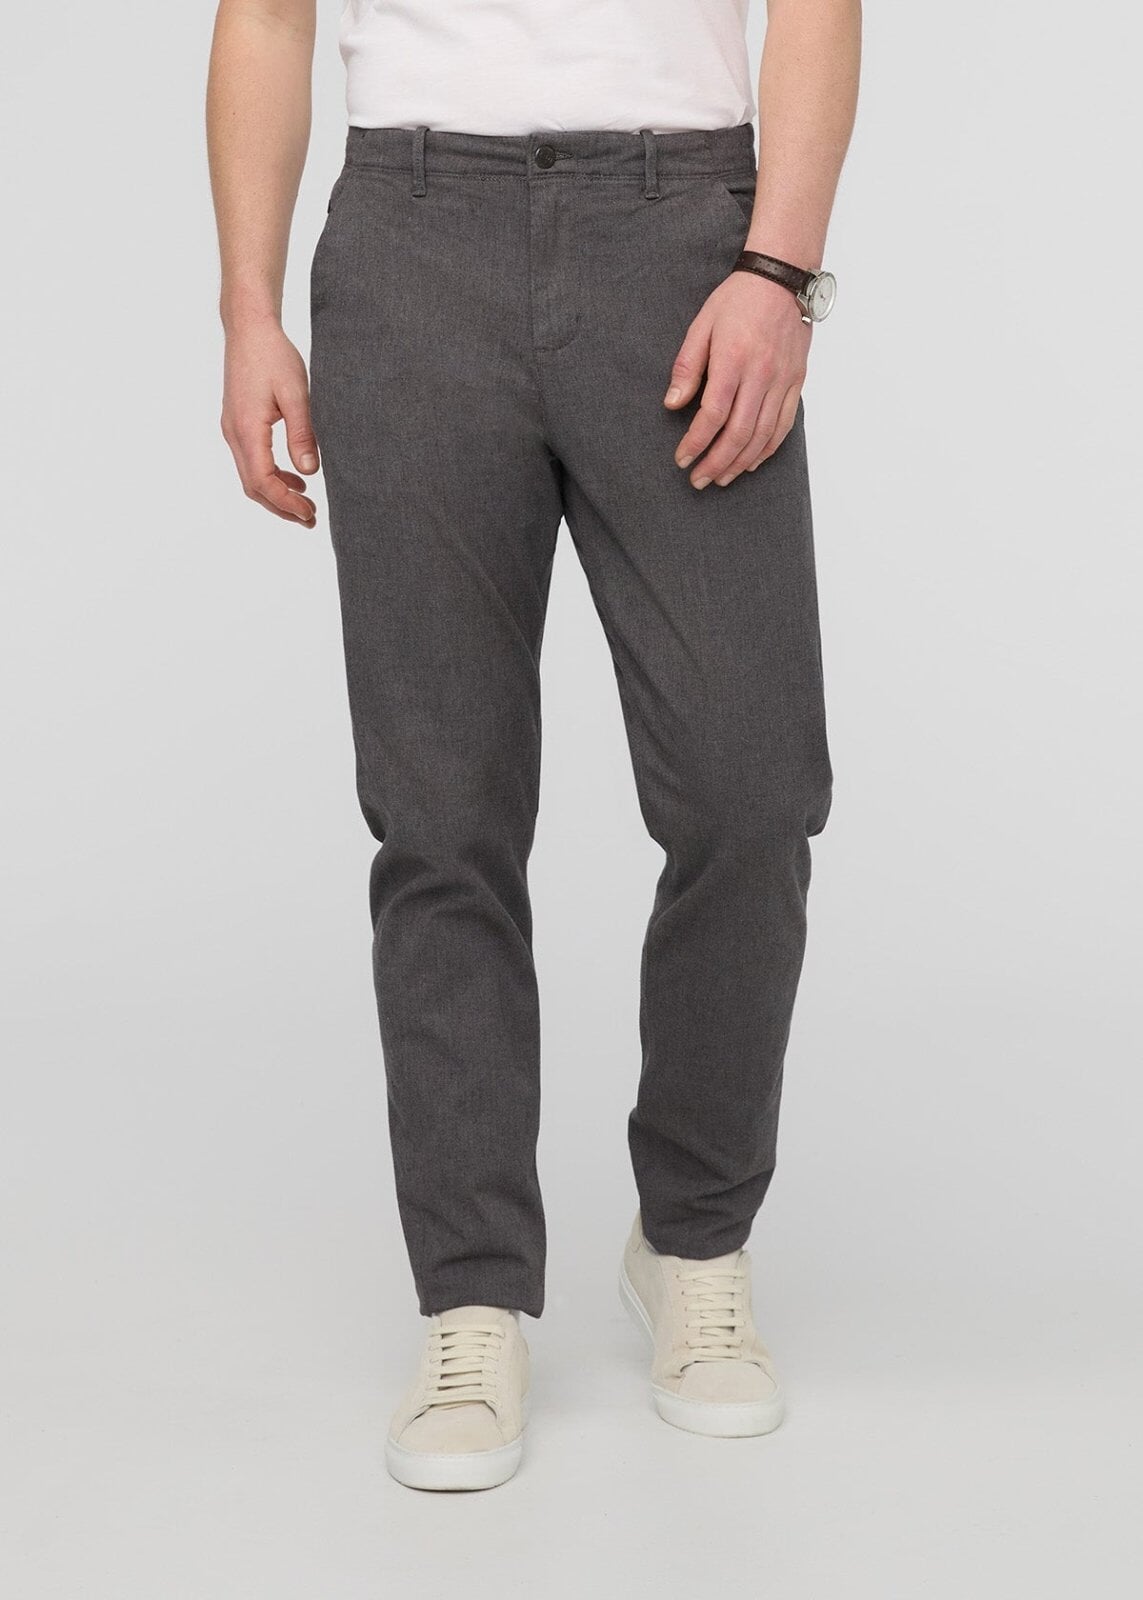 MPTS1322 LiveFree Flex Pant Heather Grey 0722 Front 825187